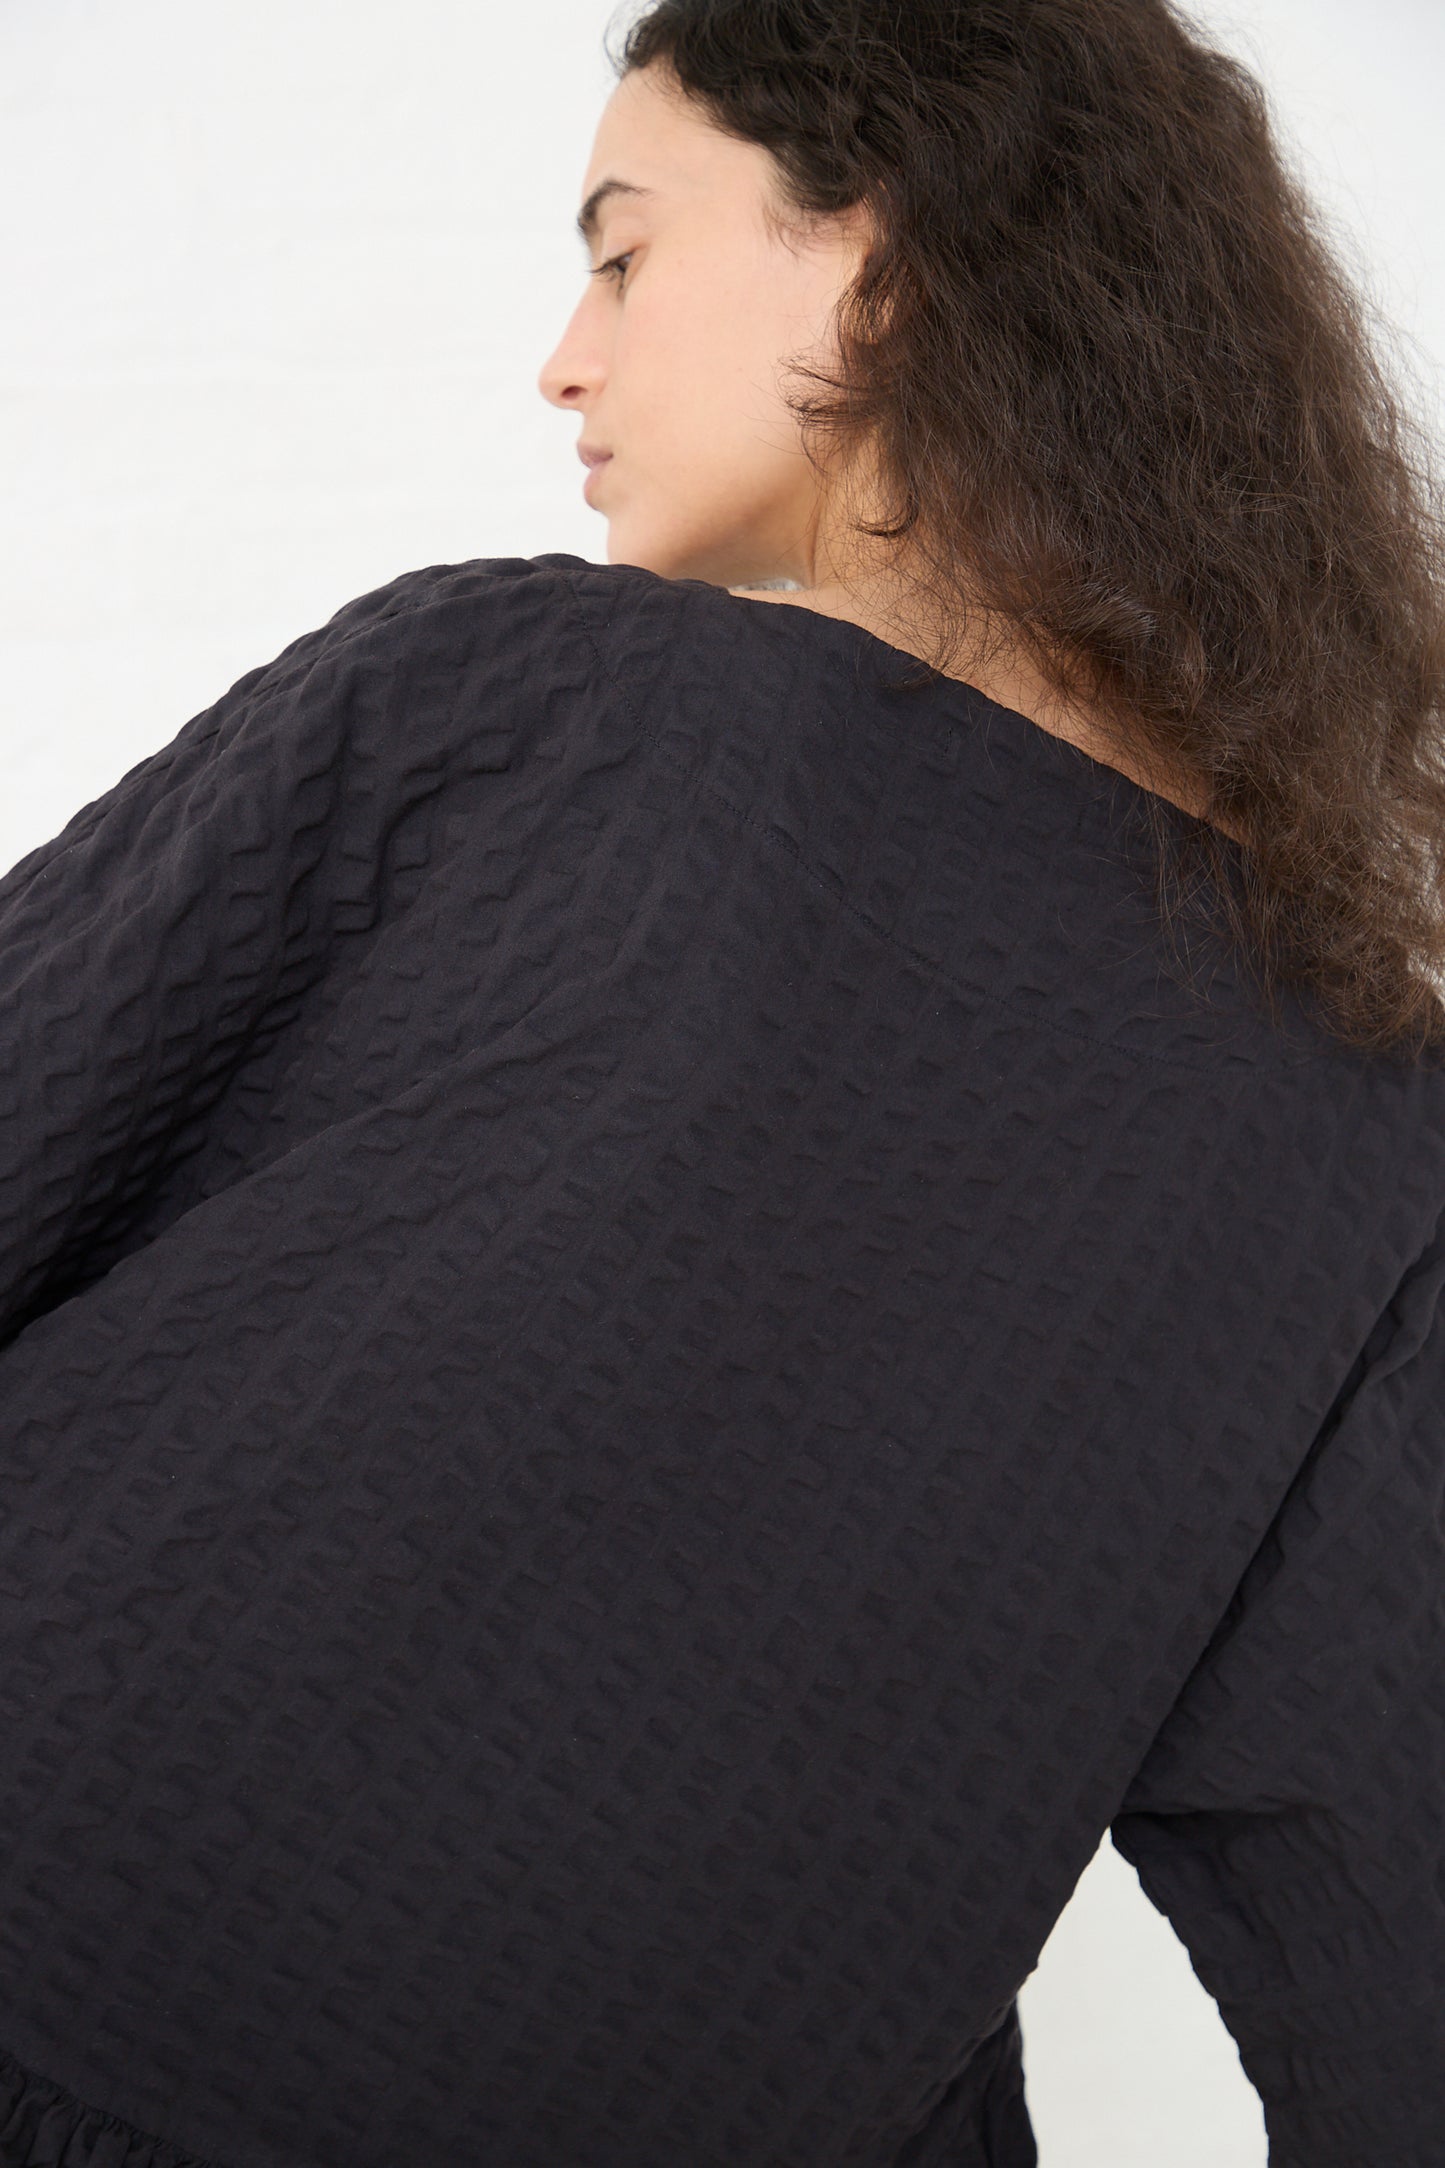 Profile view of a woman with long curly hair wearing a textured Black Crane Cotton Seersucker Tradi Dress in Ink Black top.